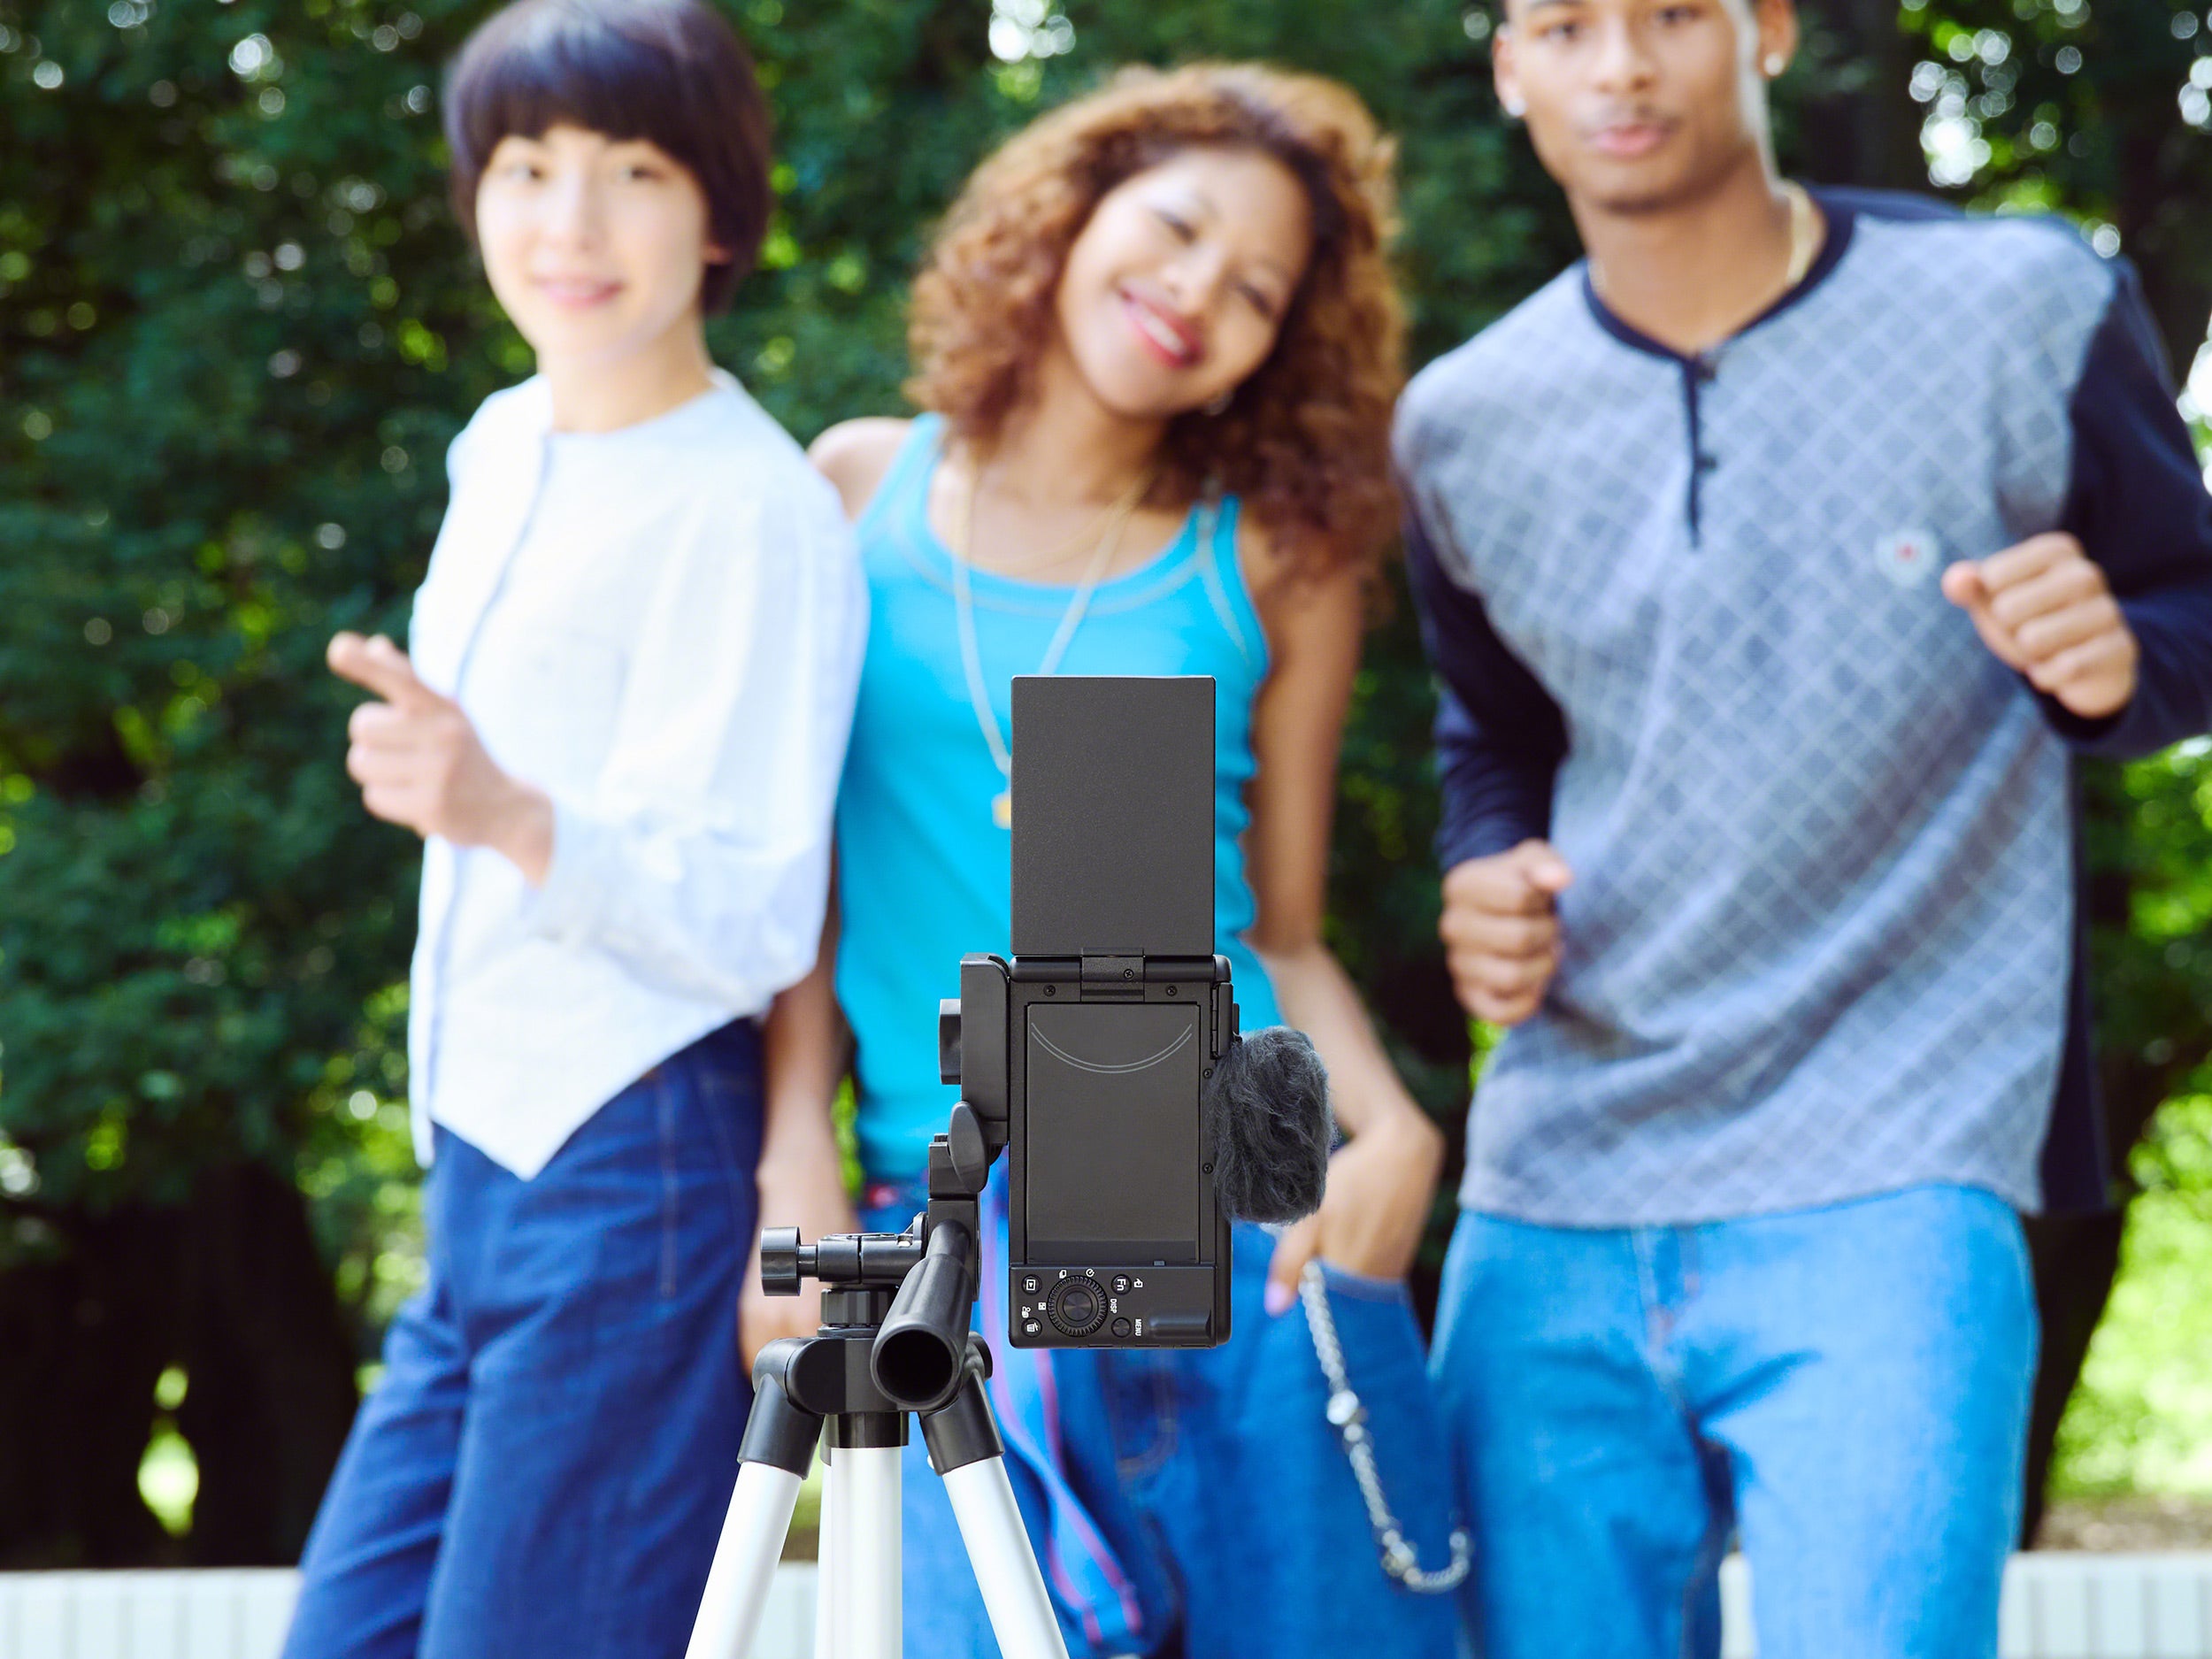 You can easily record vertical videos for social media on the ZV-1F.